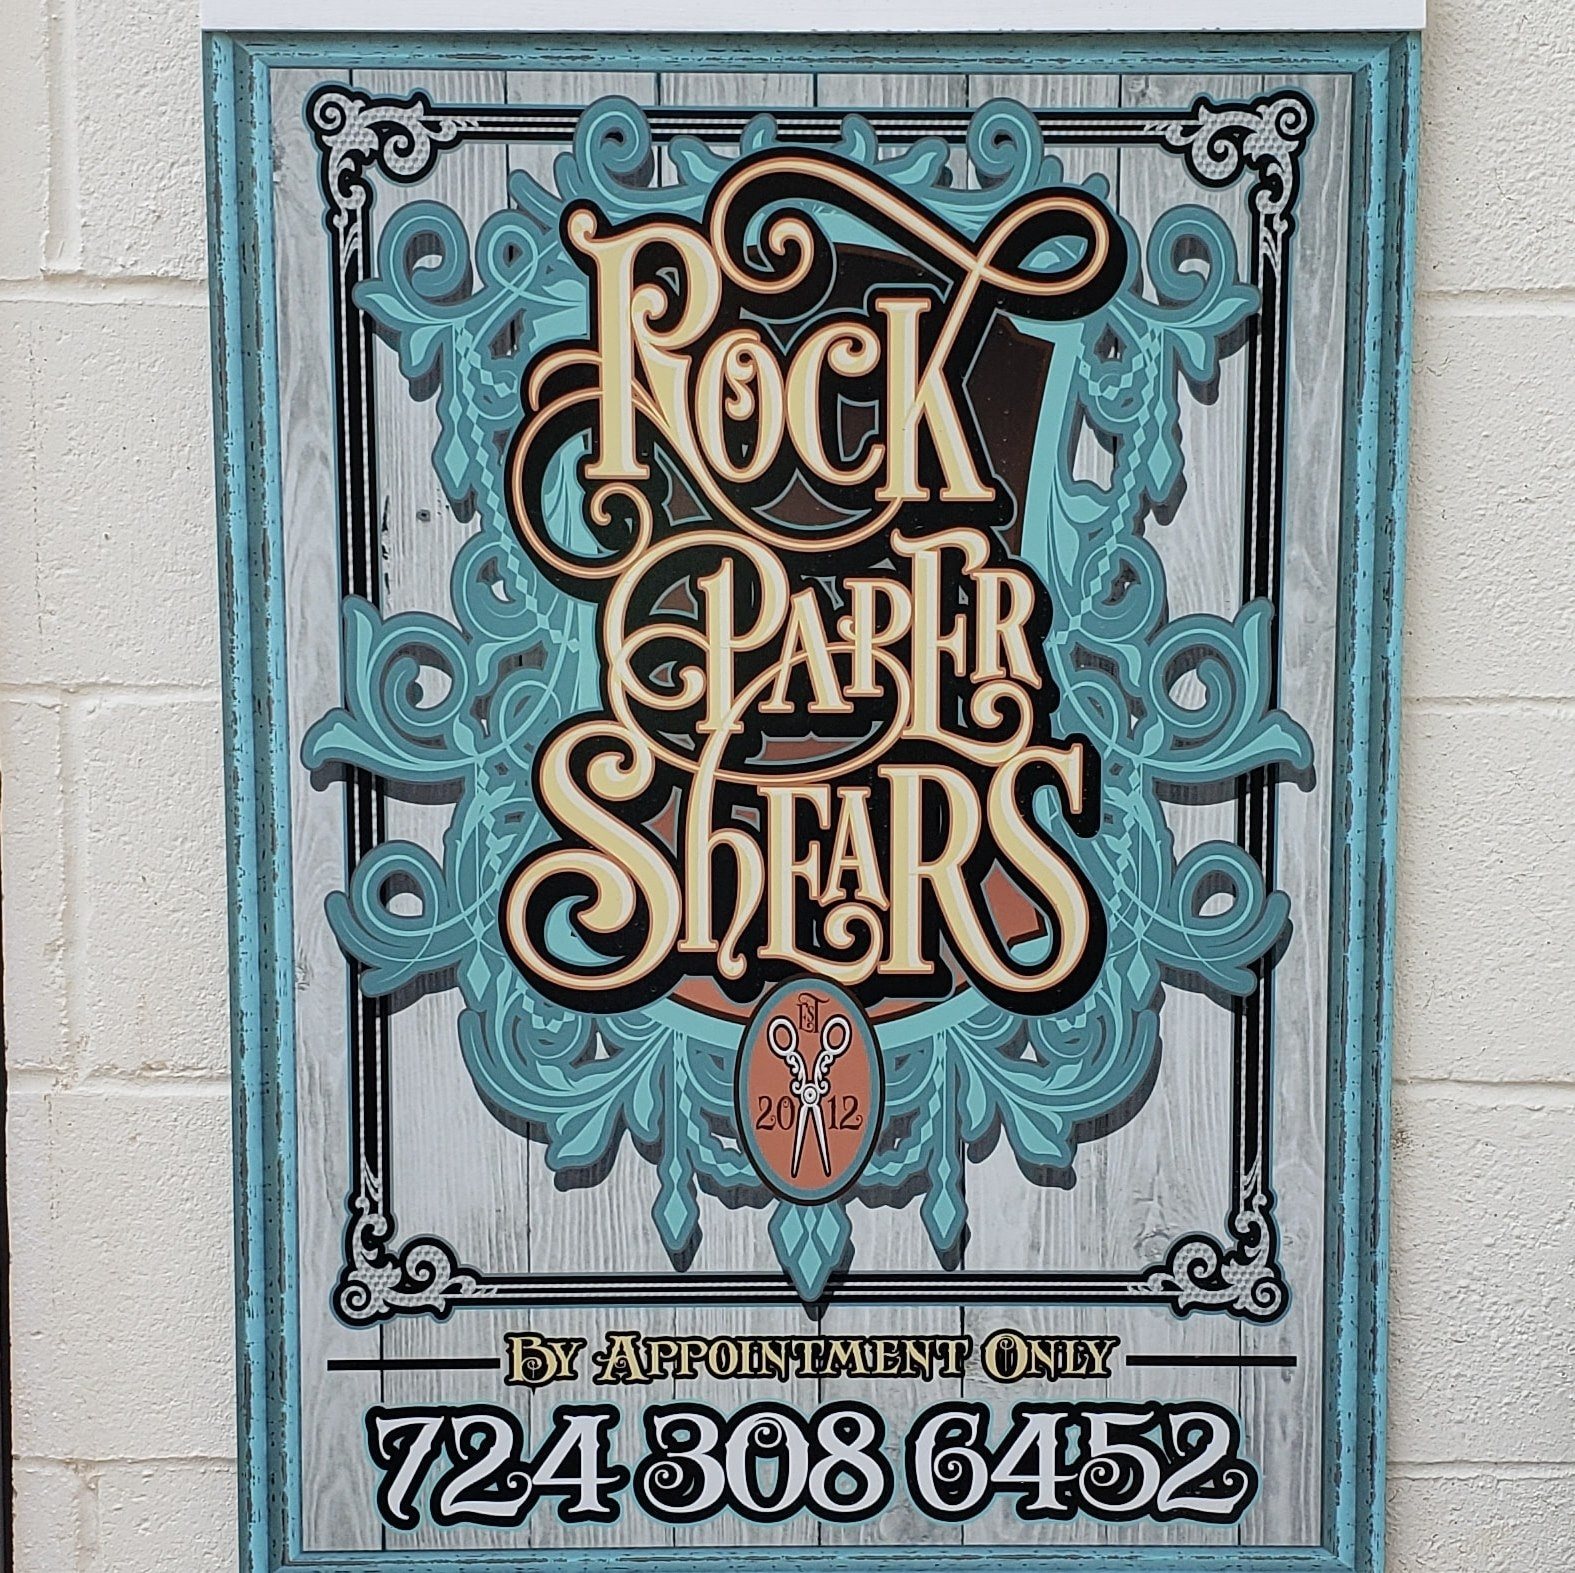 Rock Paper Shears 1013 Brentwood Dr, Greenville Pennsylvania 16125